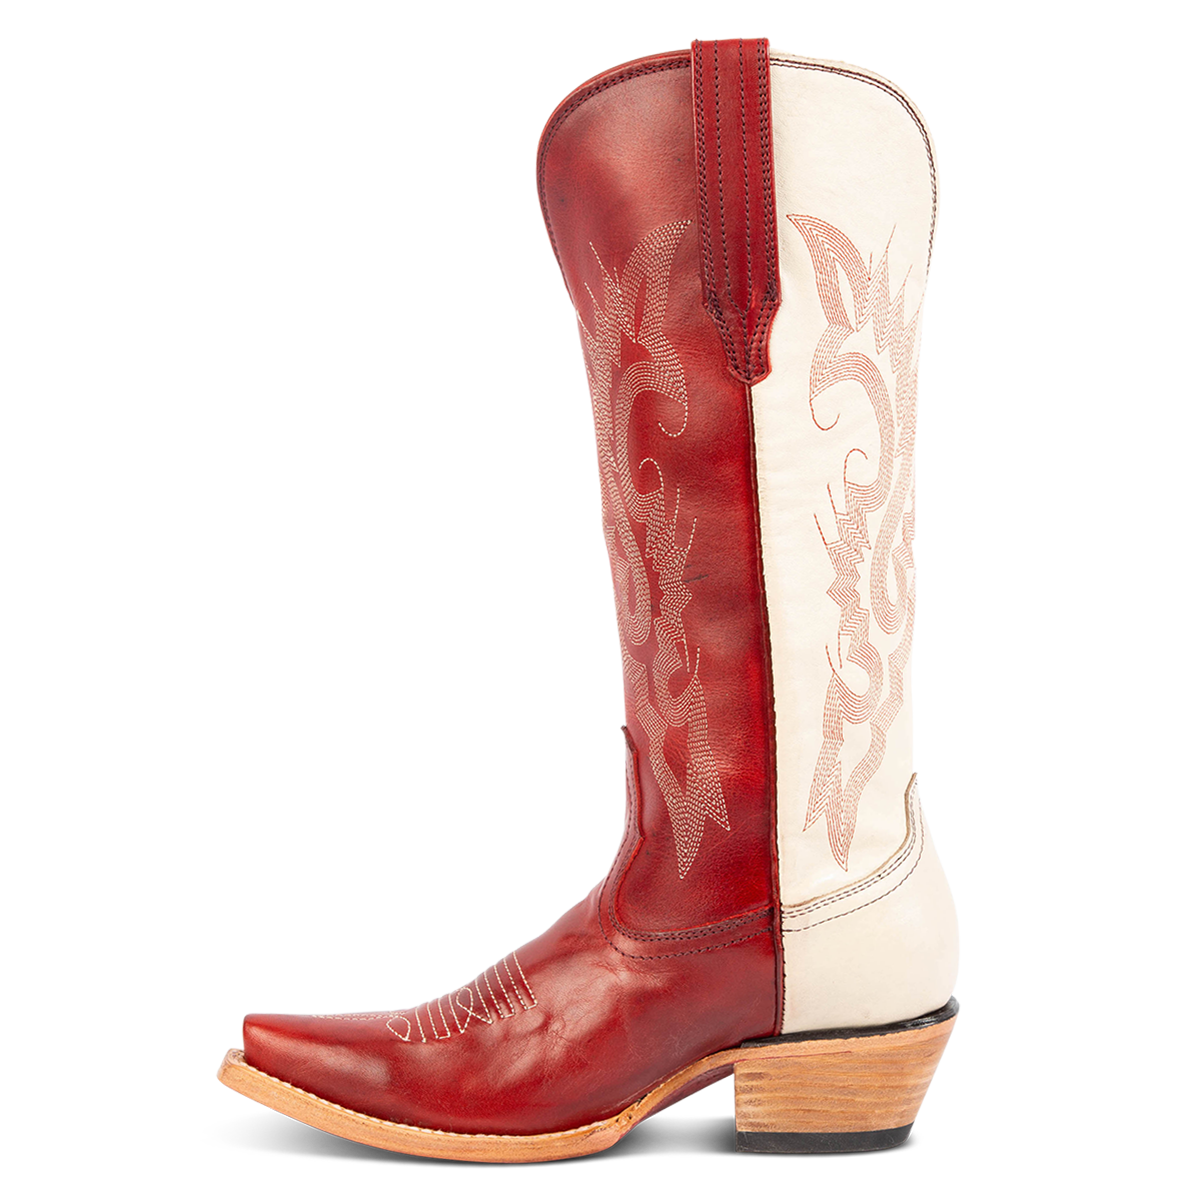 Side view showing leather pull straps and western stitch detailing on FREEBIRD women's Woodland red multi boot